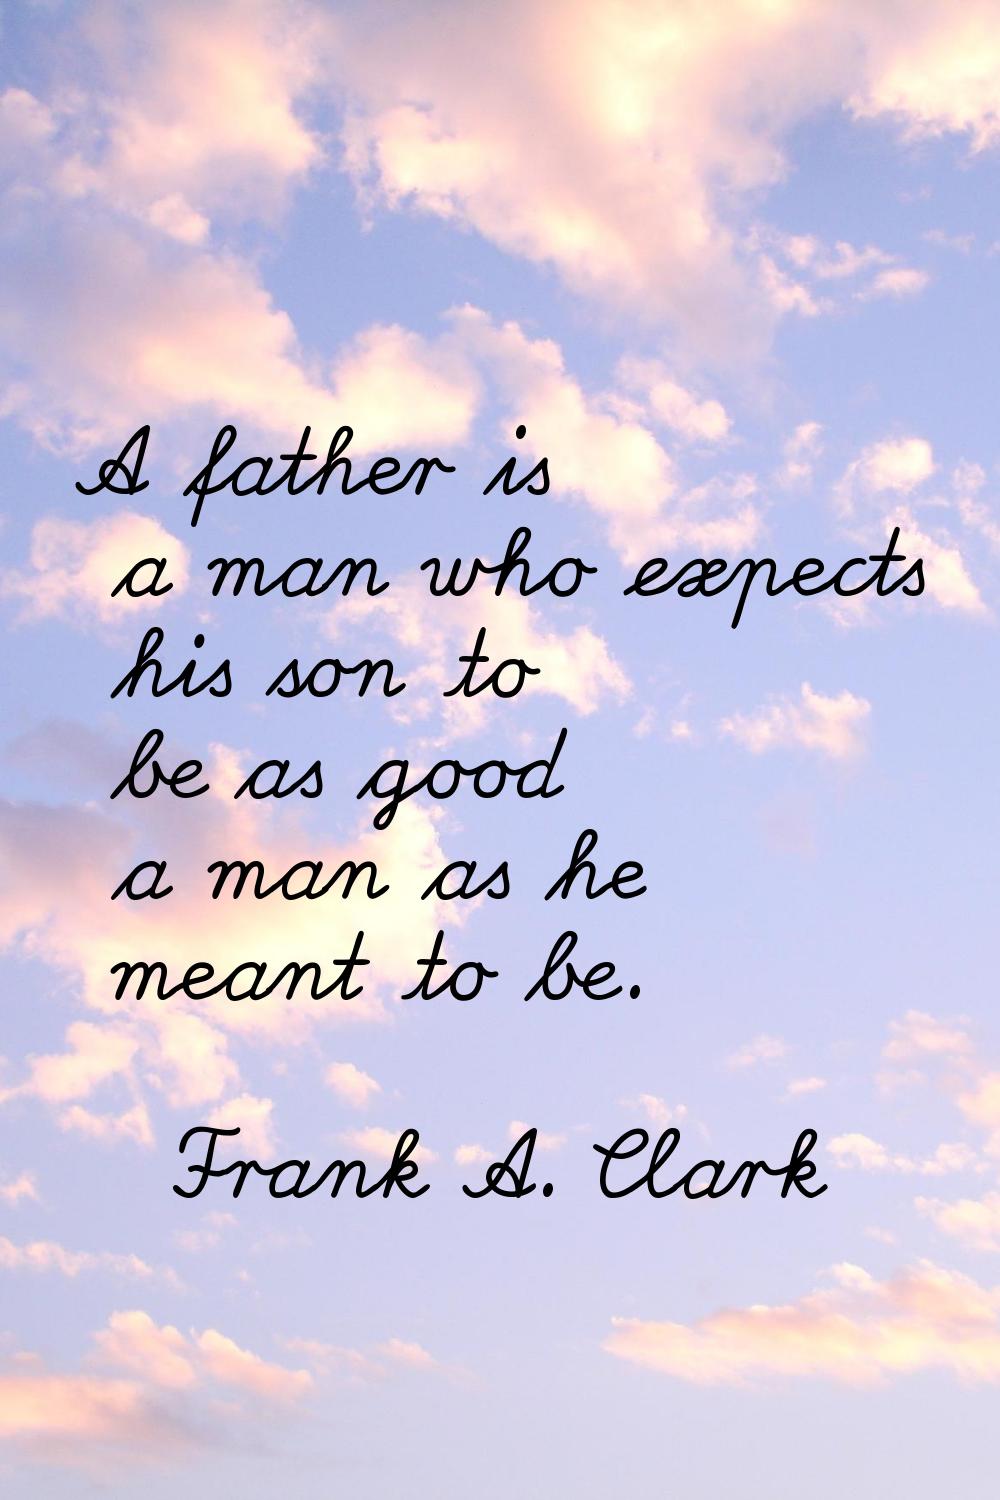 A father is a man who expects his son to be as good a man as he meant to be.